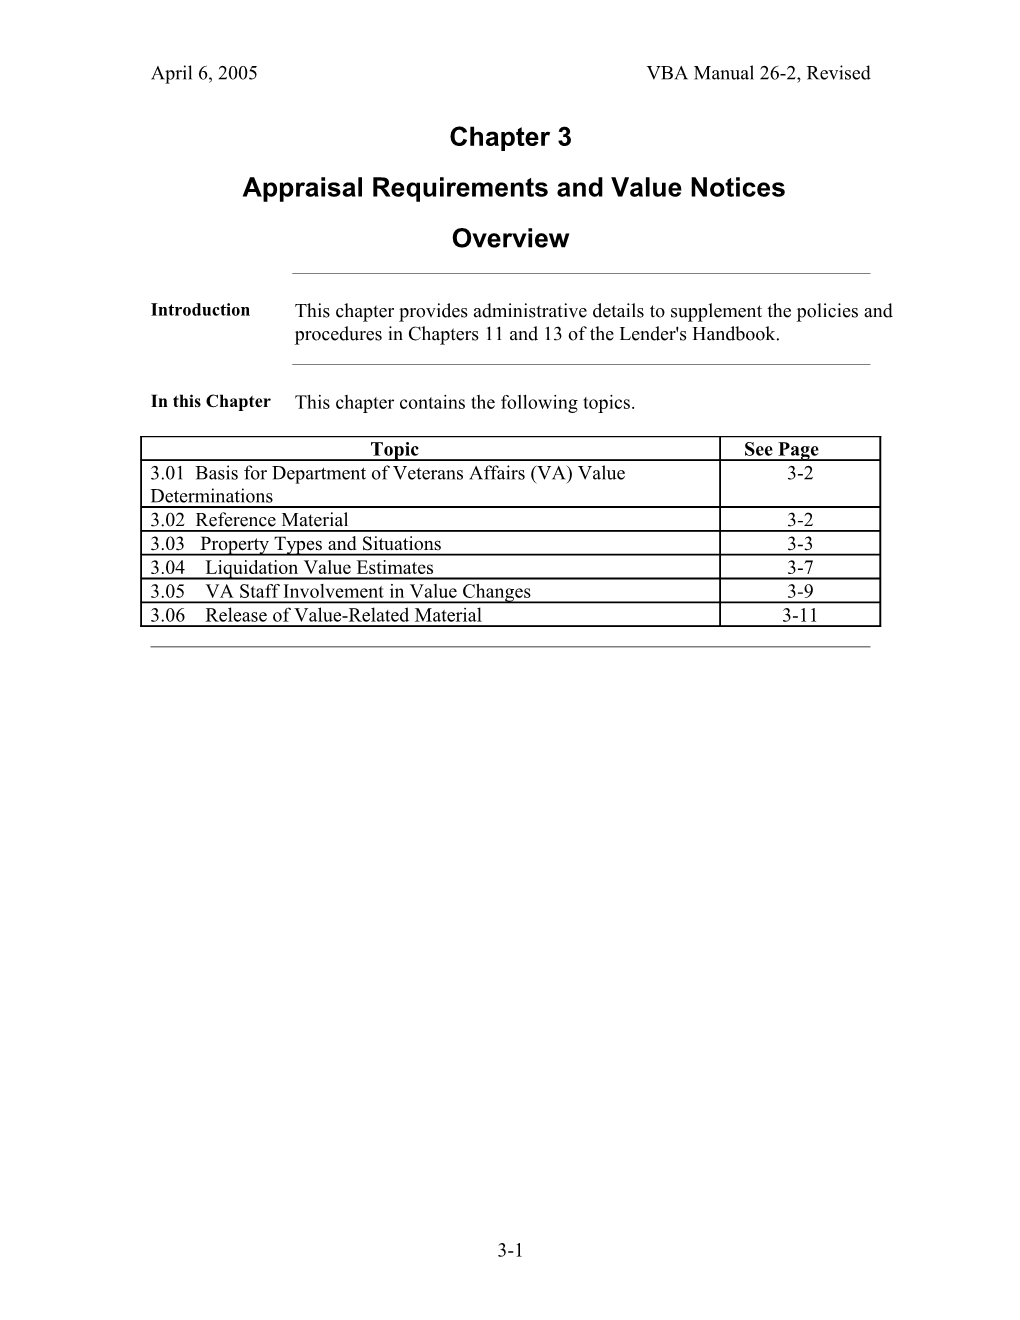 Appraisal Requirements and Value Notices